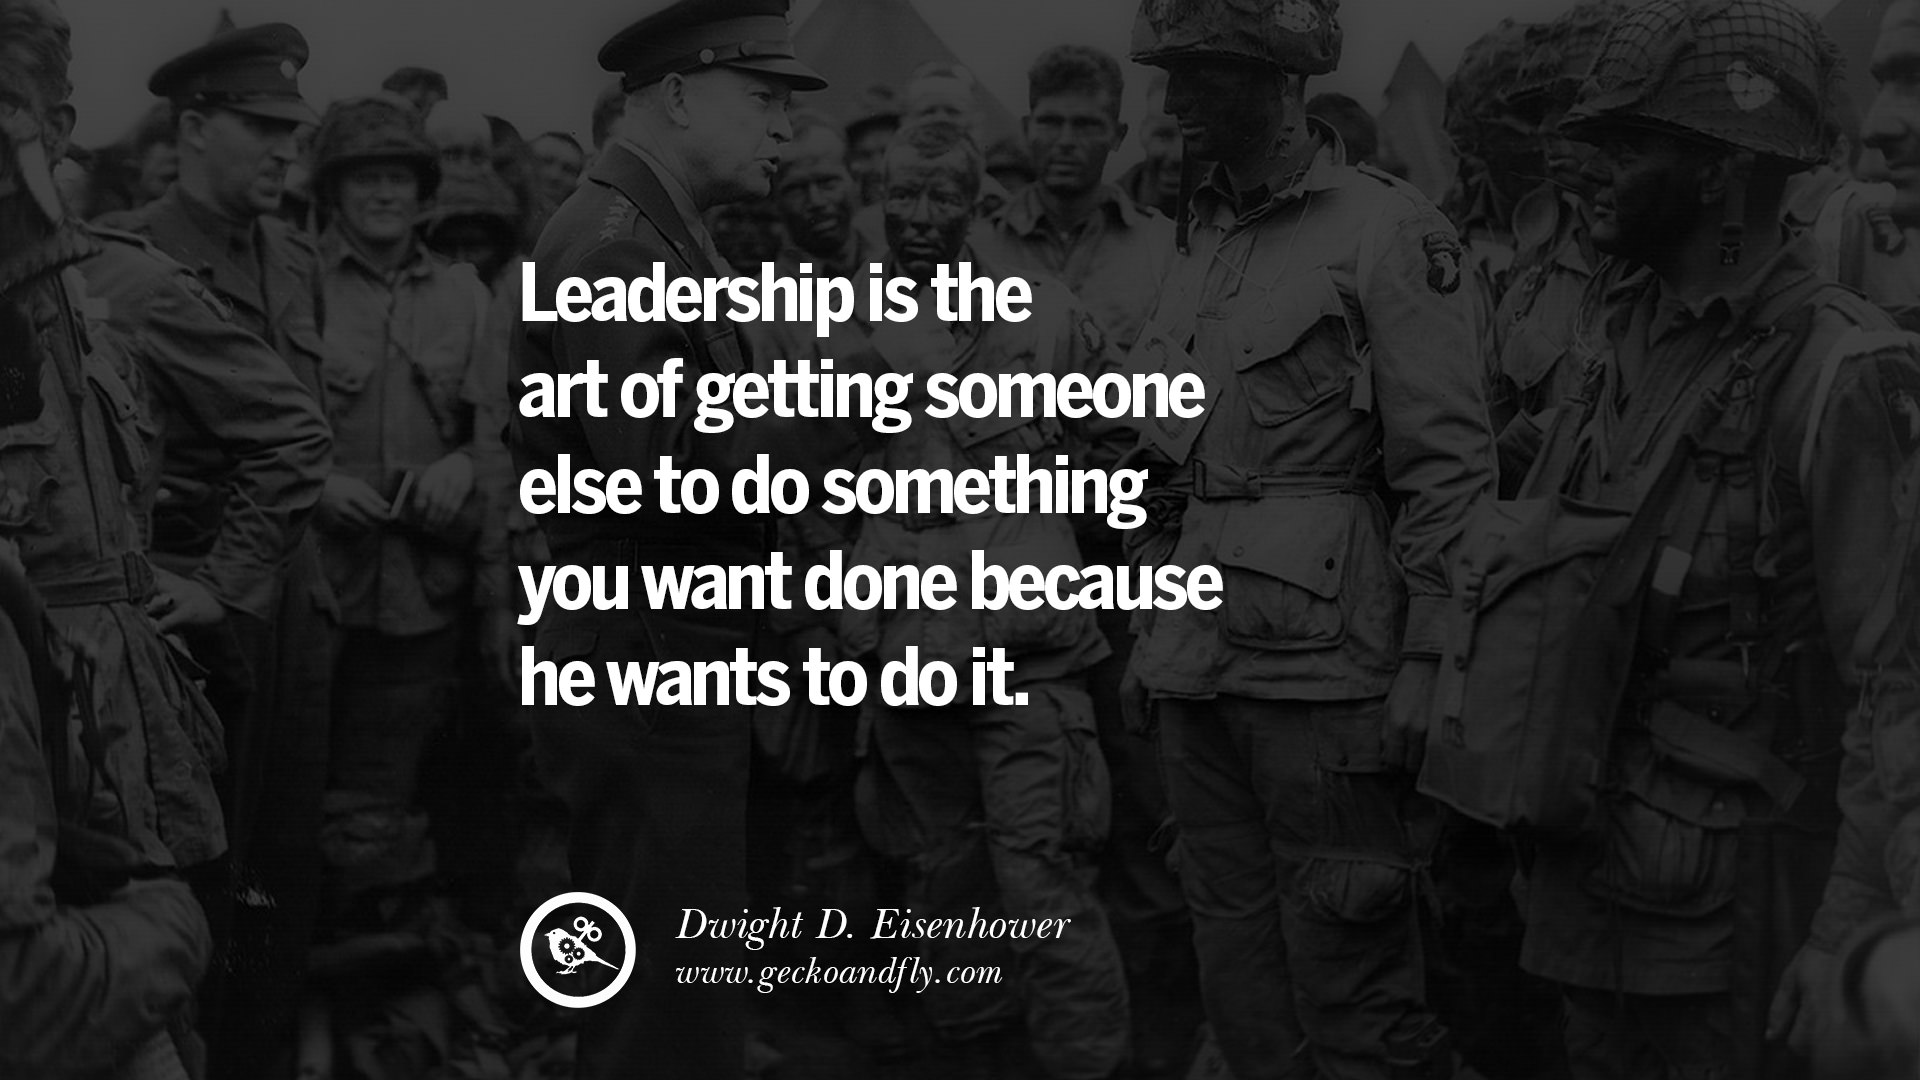 Quotes 3: 380 ALL NEW INSPIRATIONAL QUOTES BY MILITARY LEADERS